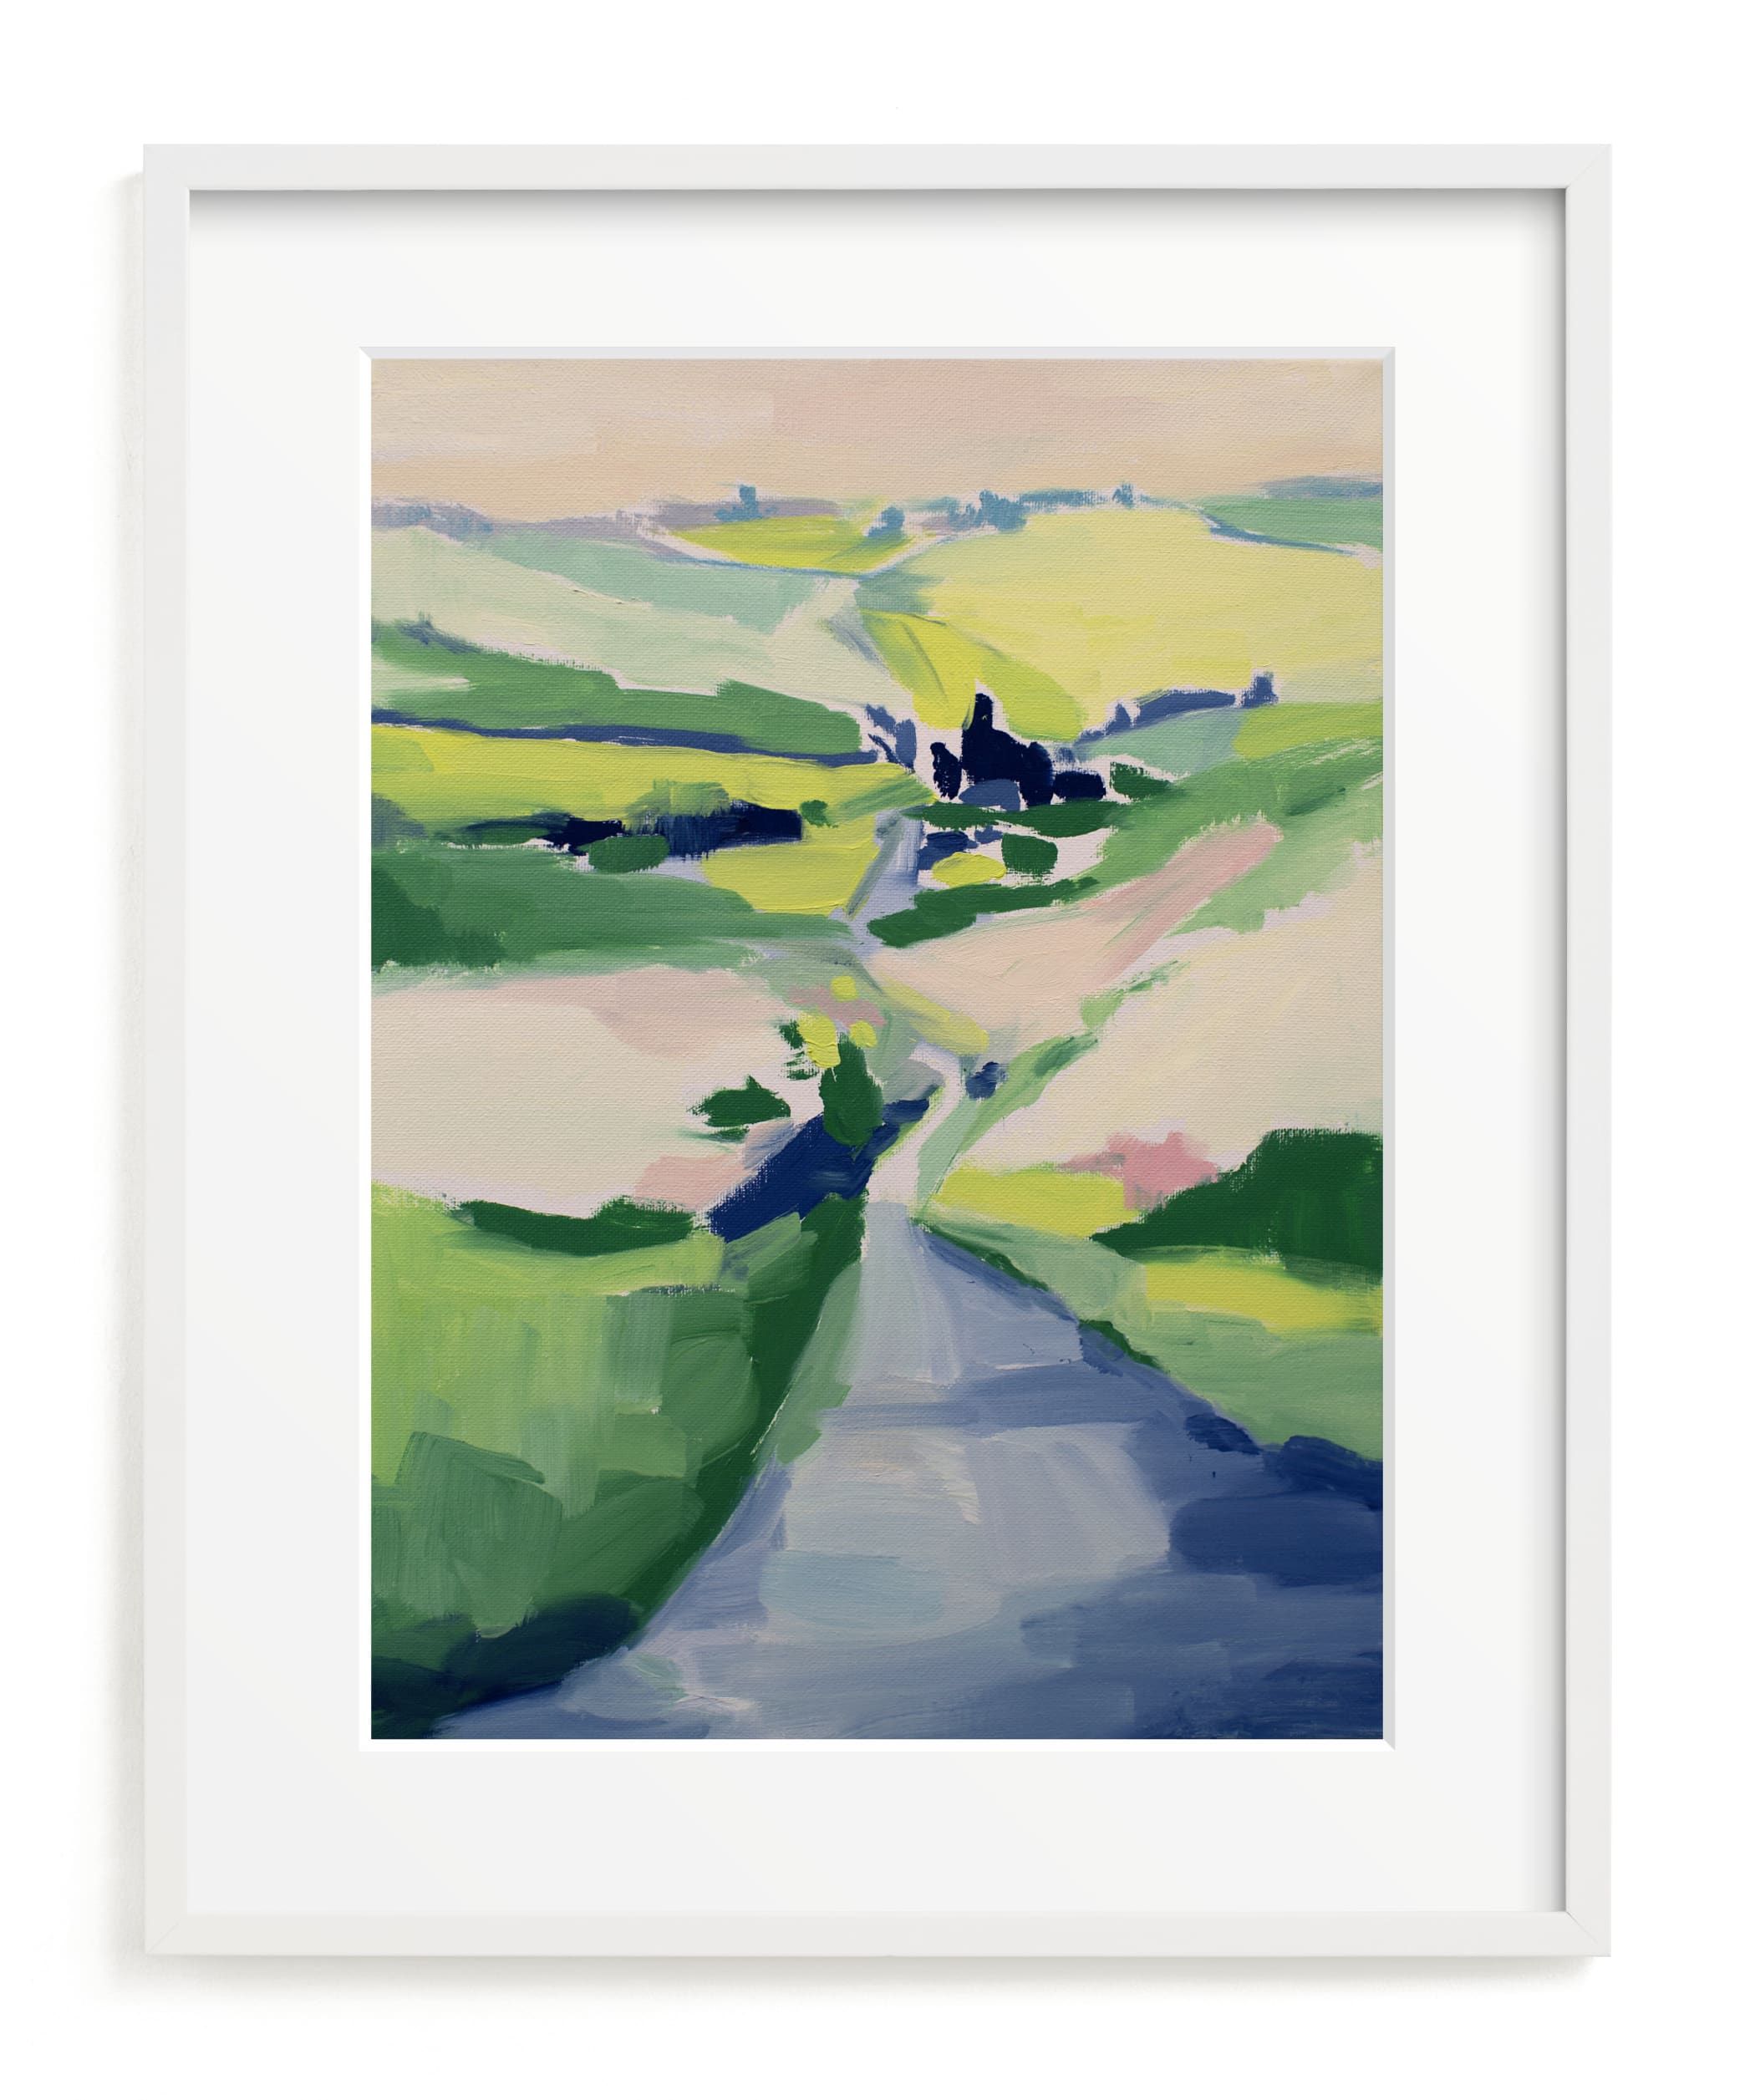 "Meandering Through" - Painting Limited Edition Art Print by Alysia Quisenberry. | Minted